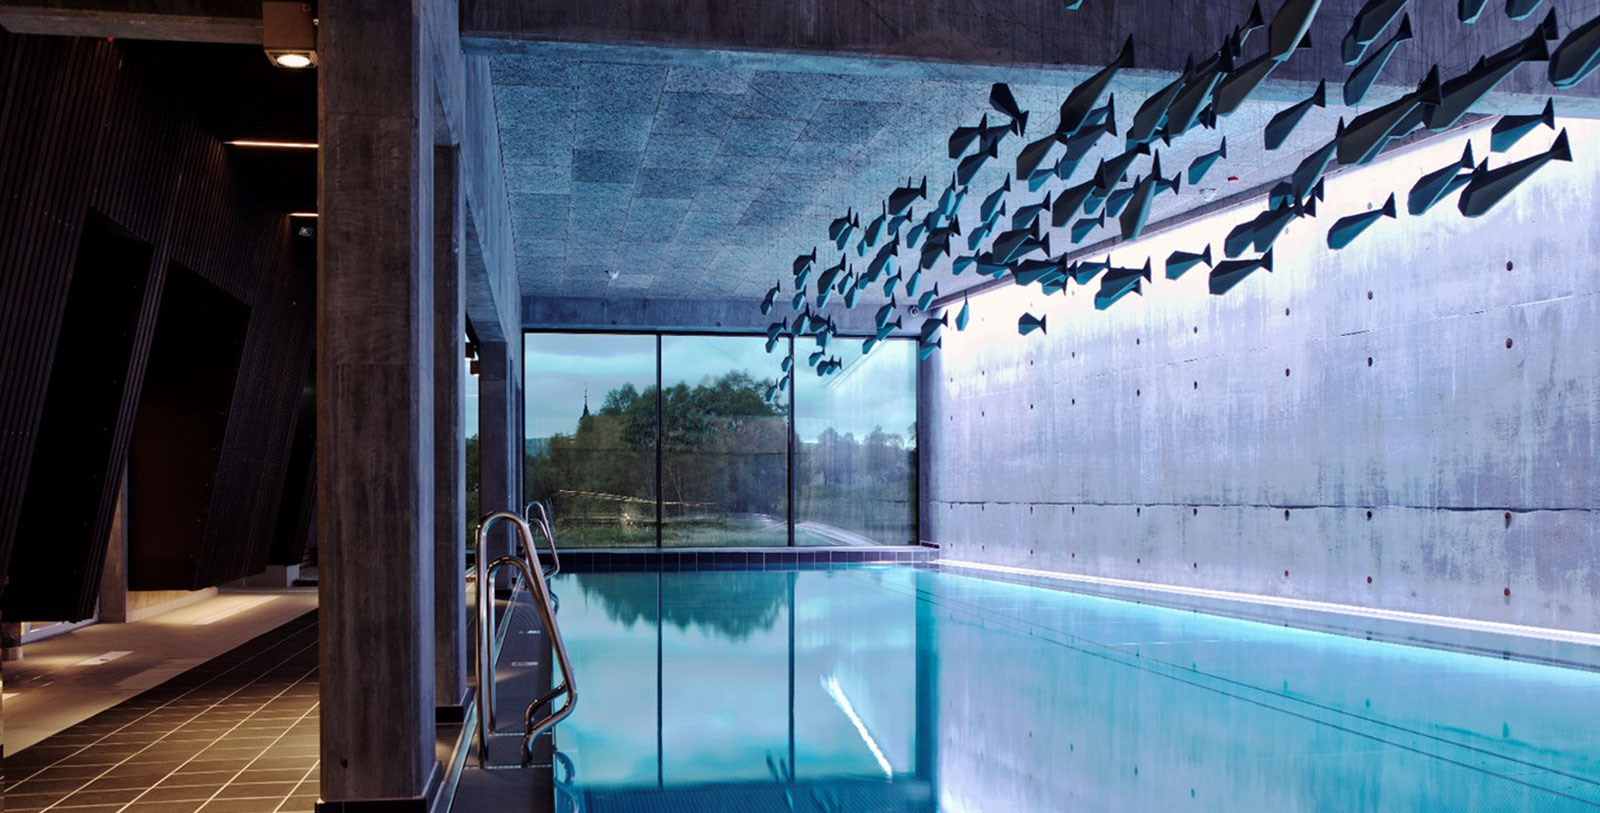 Experience the rejuvenating effects of the hotel's exceptional spa and sauna.